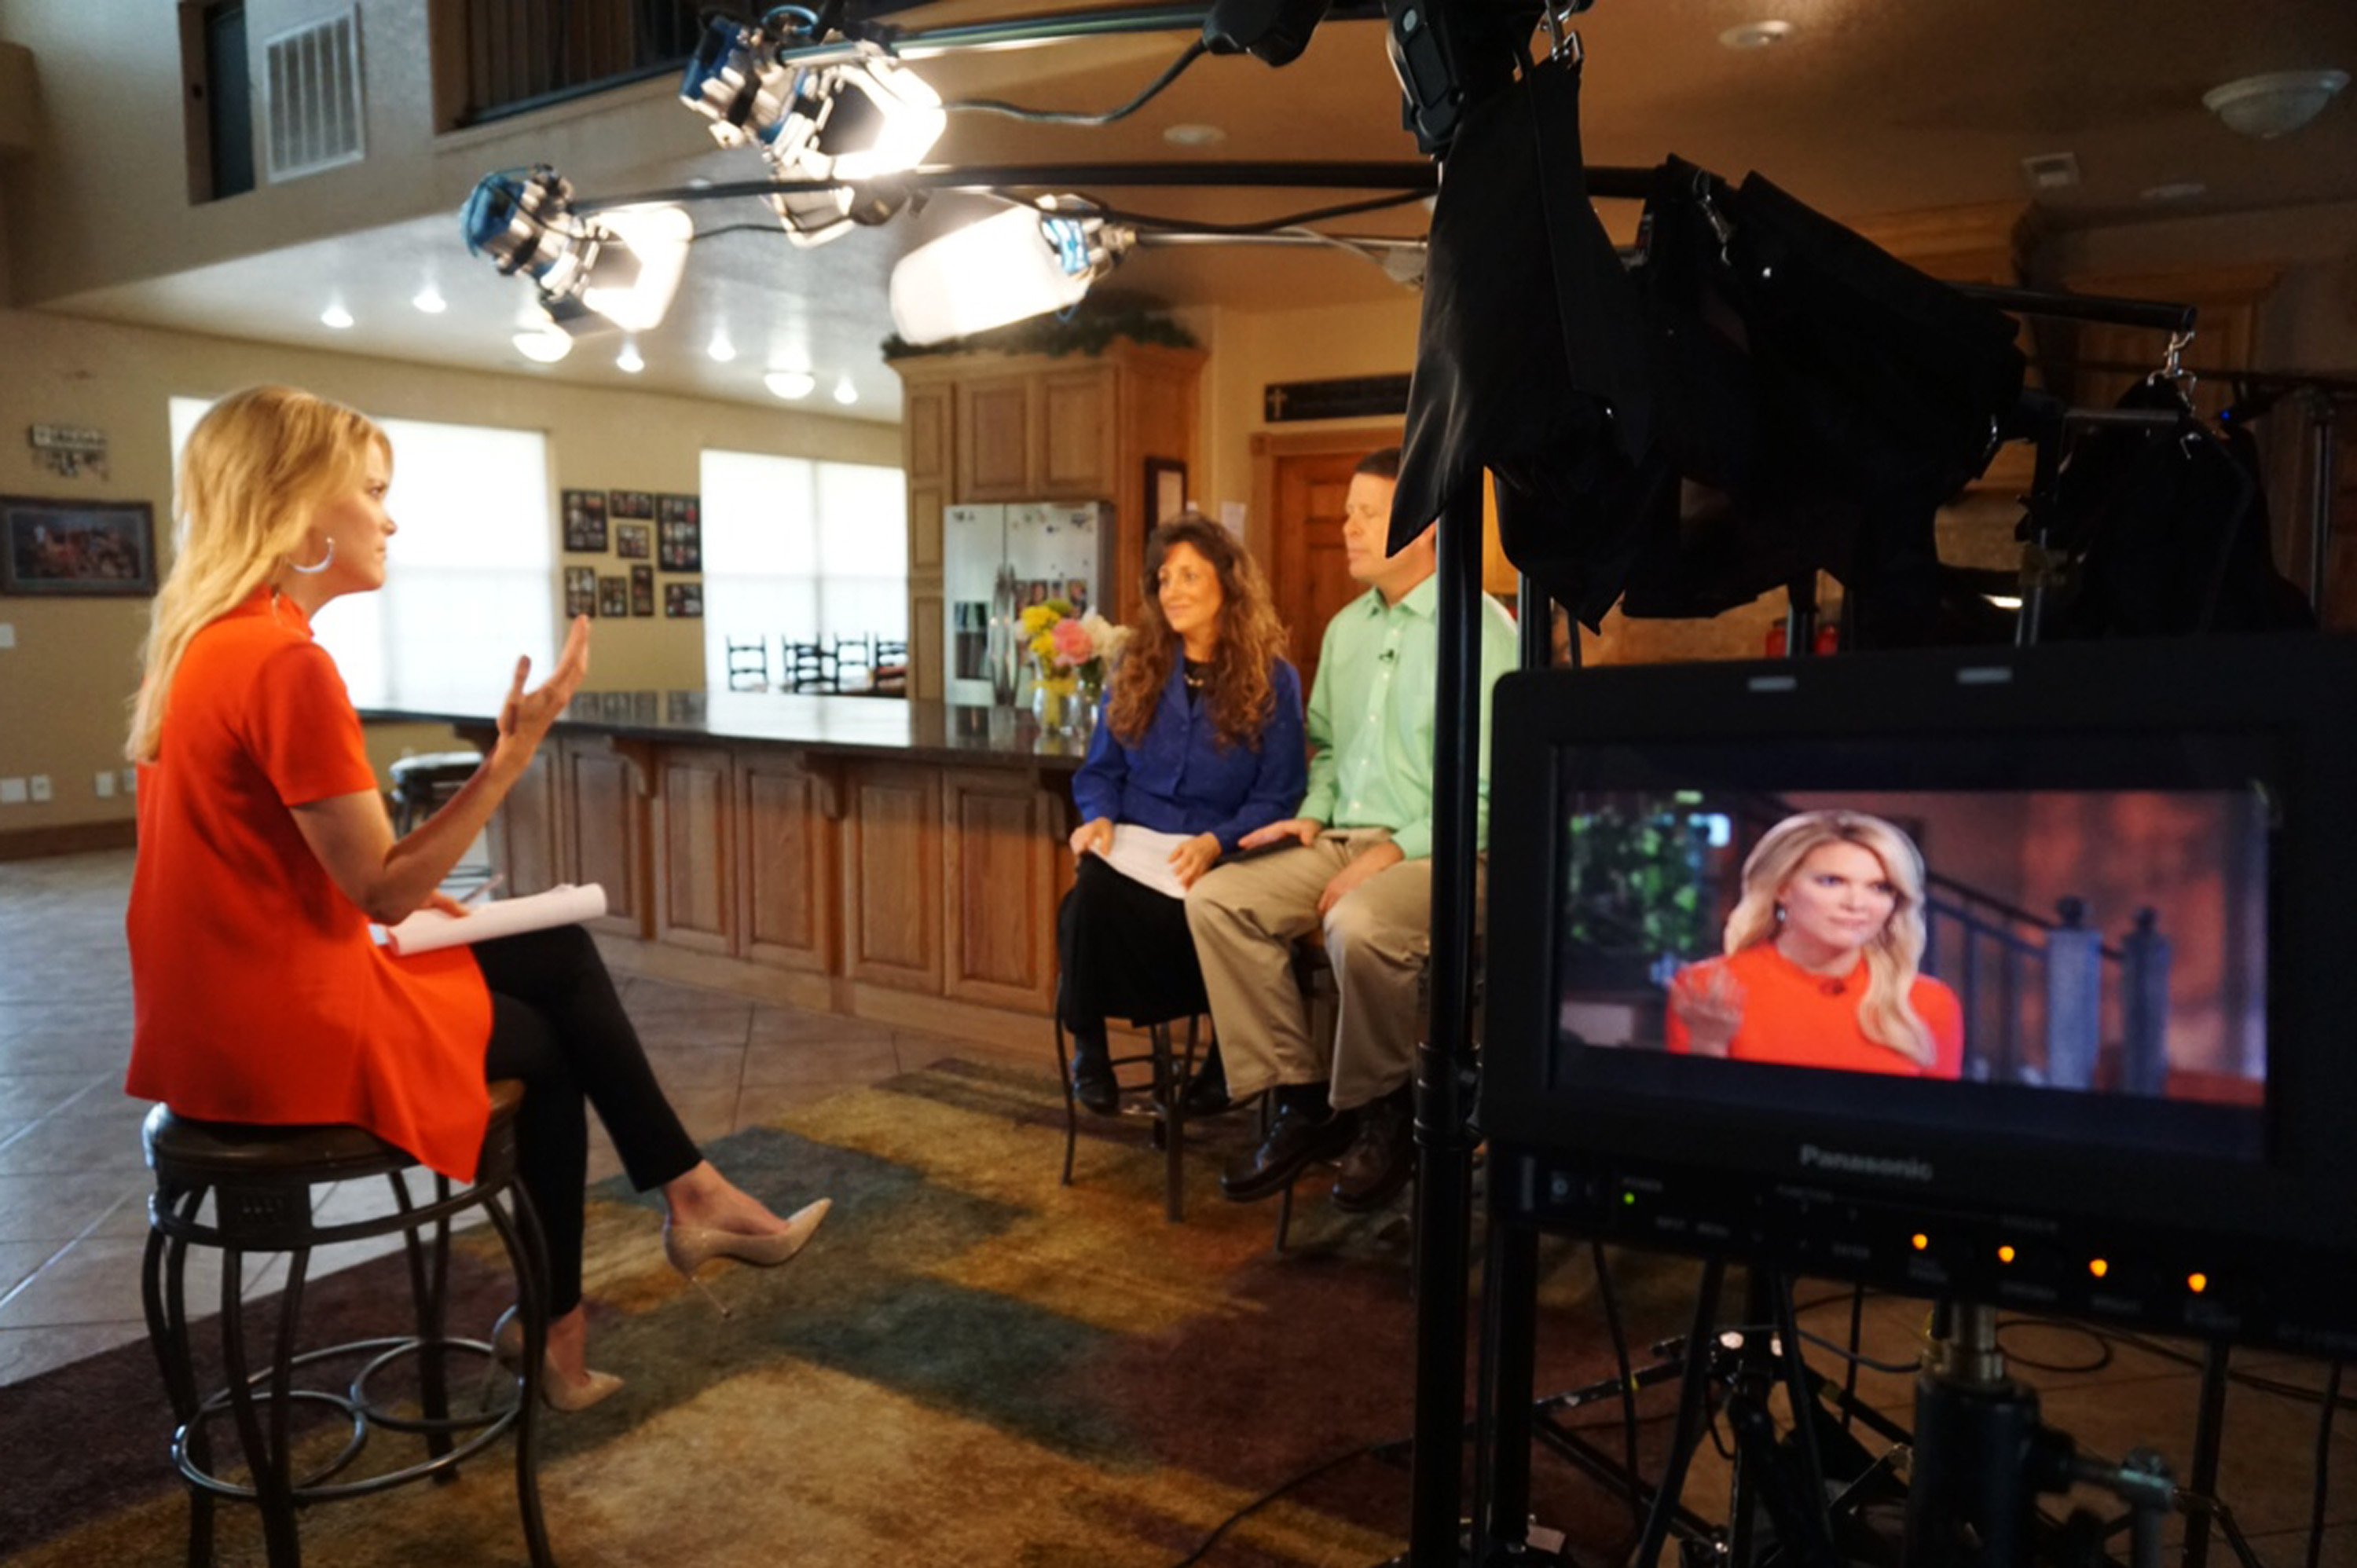 Jim Bob and Michelle Duggar sit down for an interview with Megyn Kelly